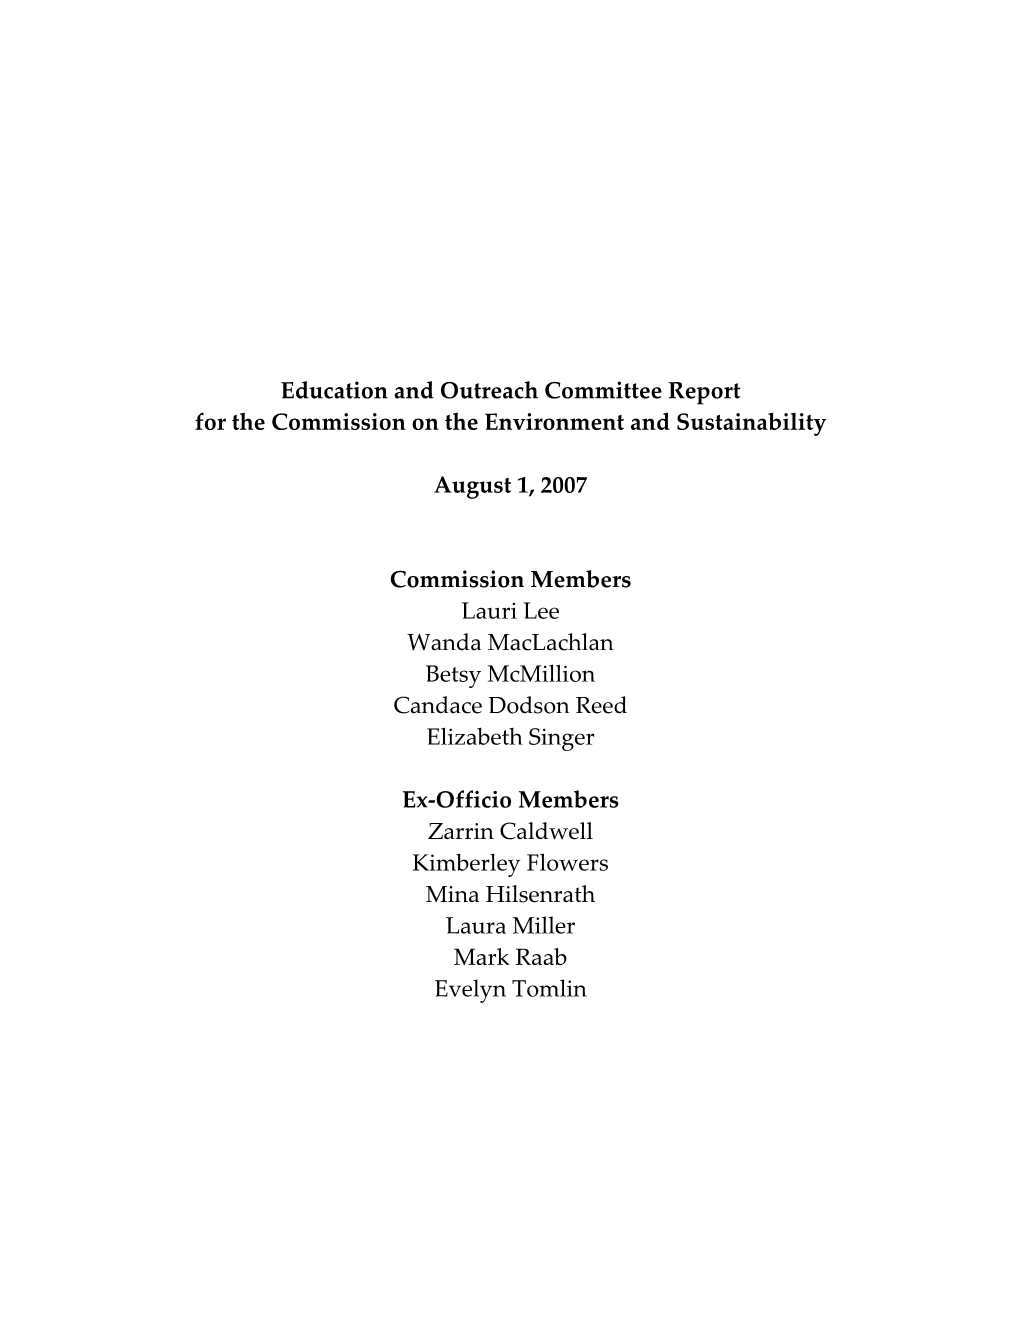 Education and Outreach Committee Report for the Commission on the Environment and Sustainability